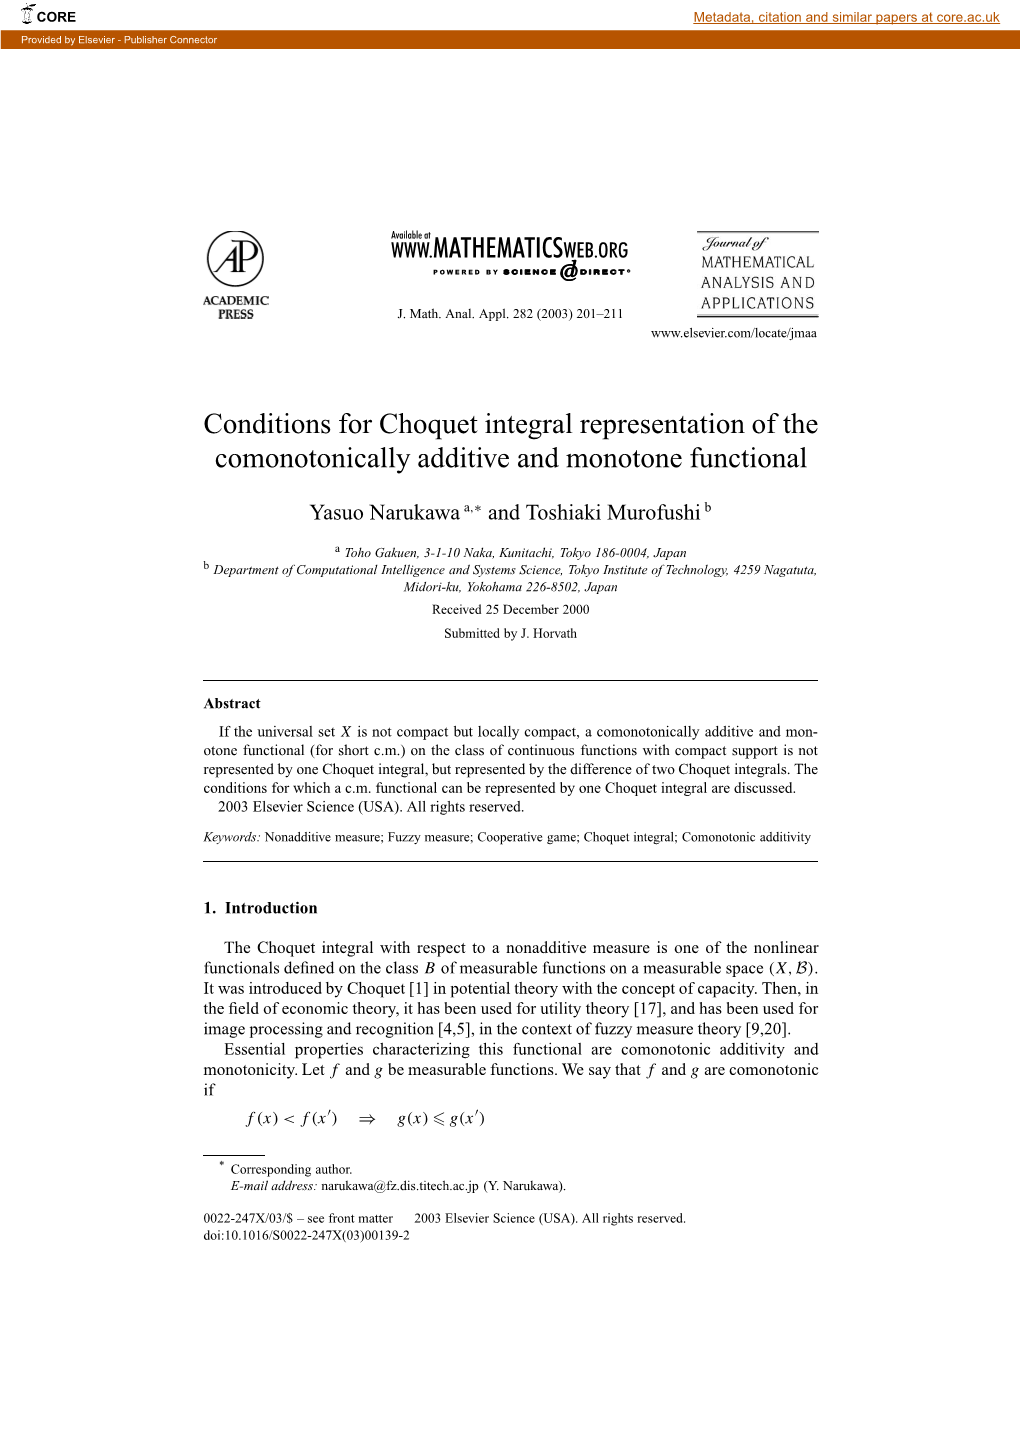 Conditions for Choquet Integral Representation of the Comonotonically Additive and Monotone Functional